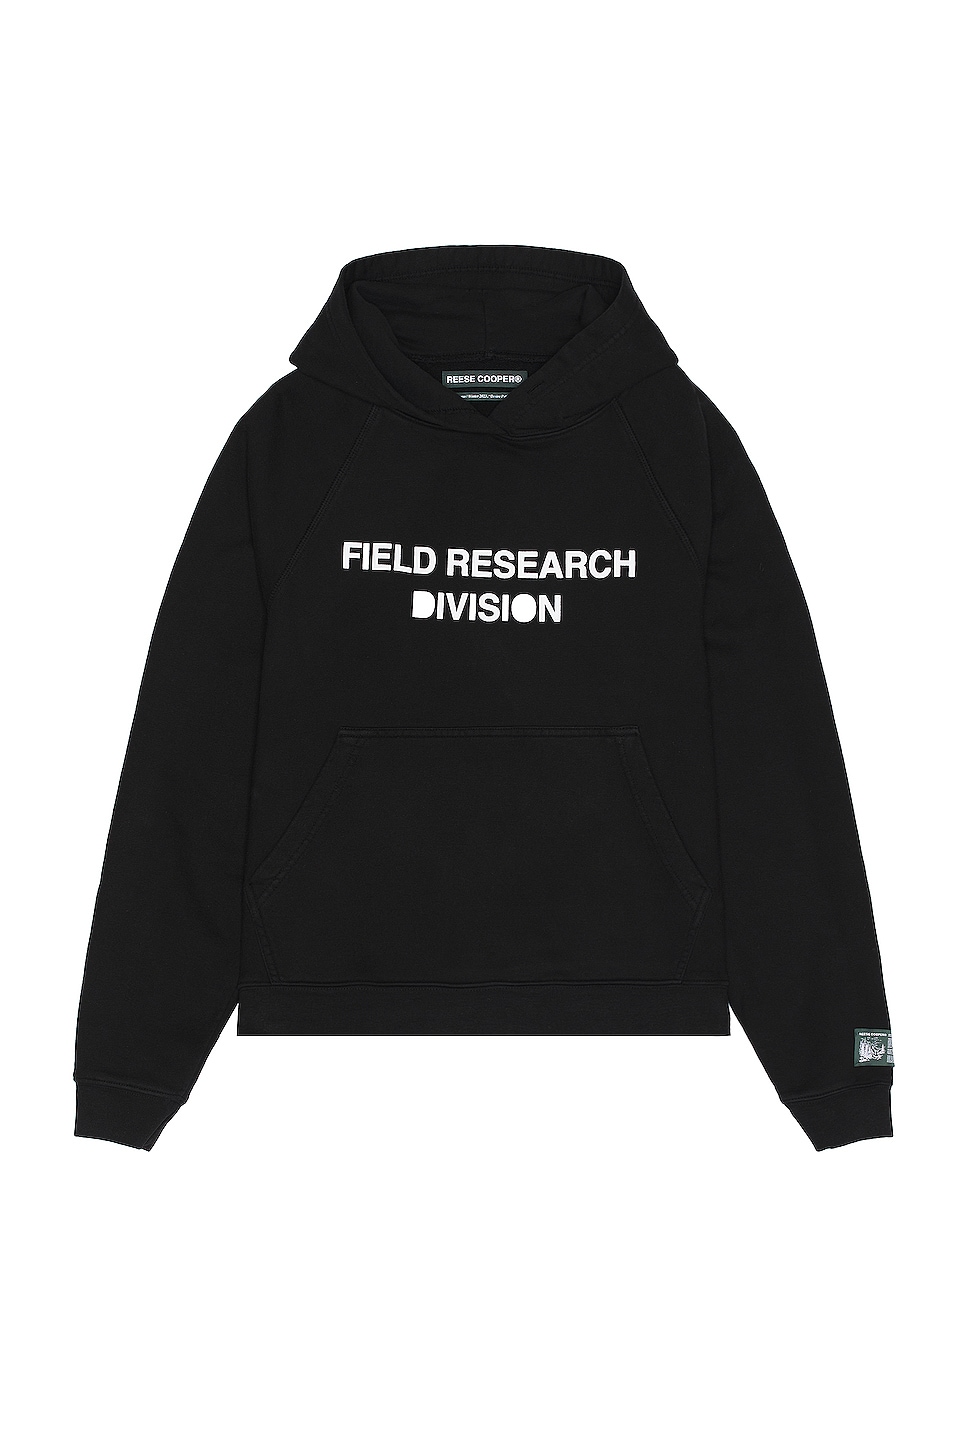 Image 1 of Reese Cooper Field Research Division Hooded Sweatshirt in Black